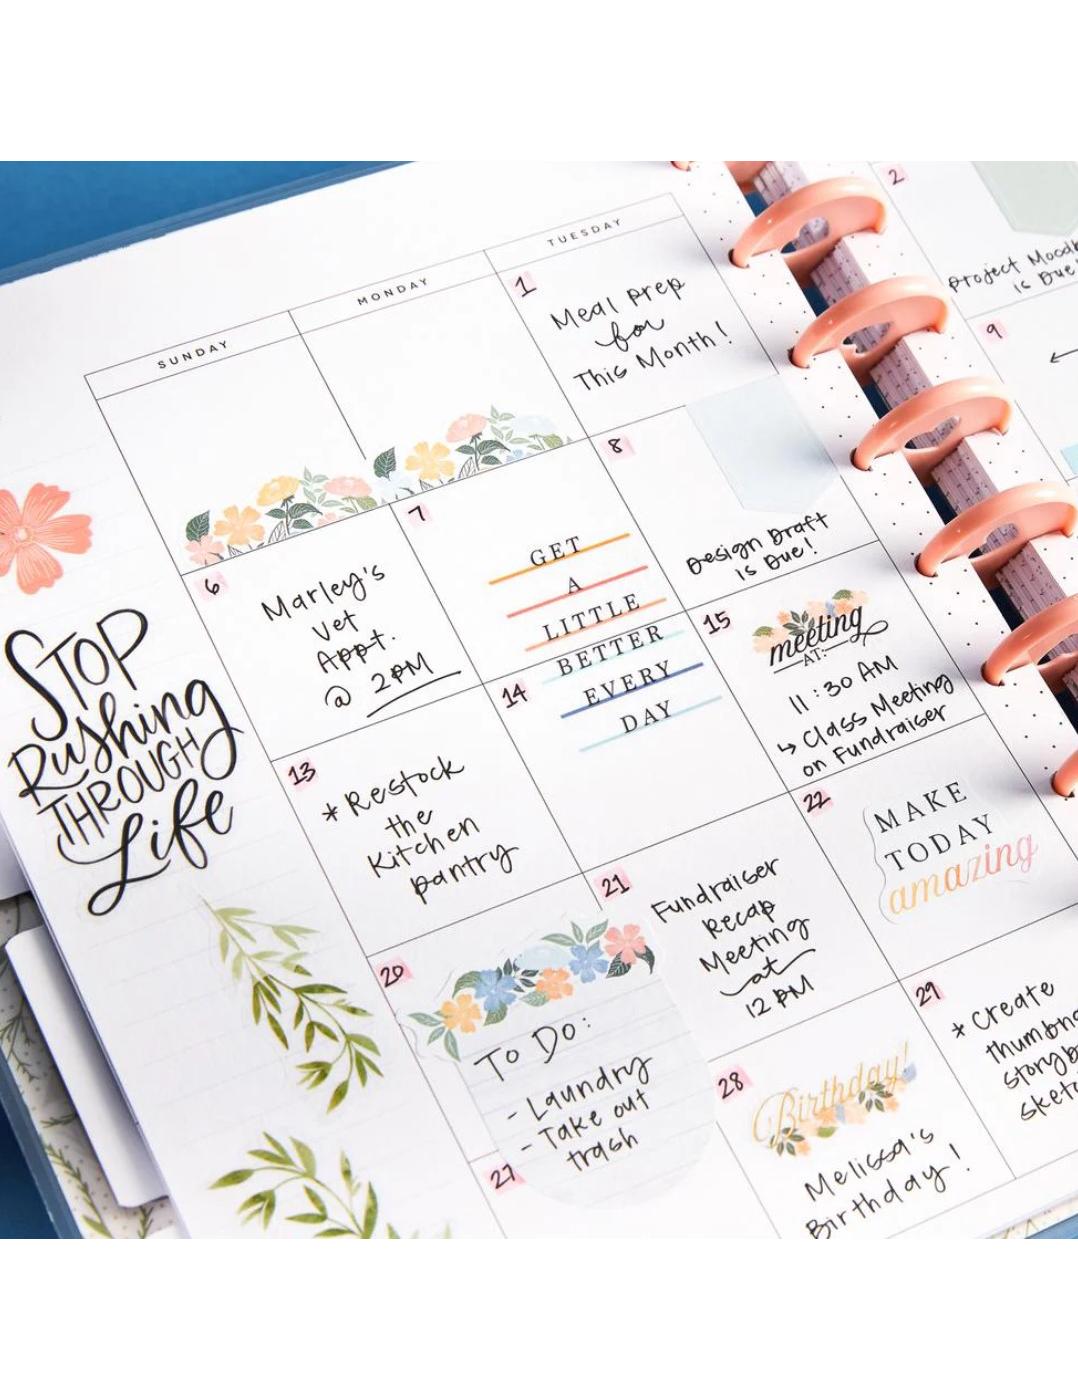 The Happy Planner Classic Planner Companion Accessories – Budget - Shop  Planners & Calendars at H-E-B